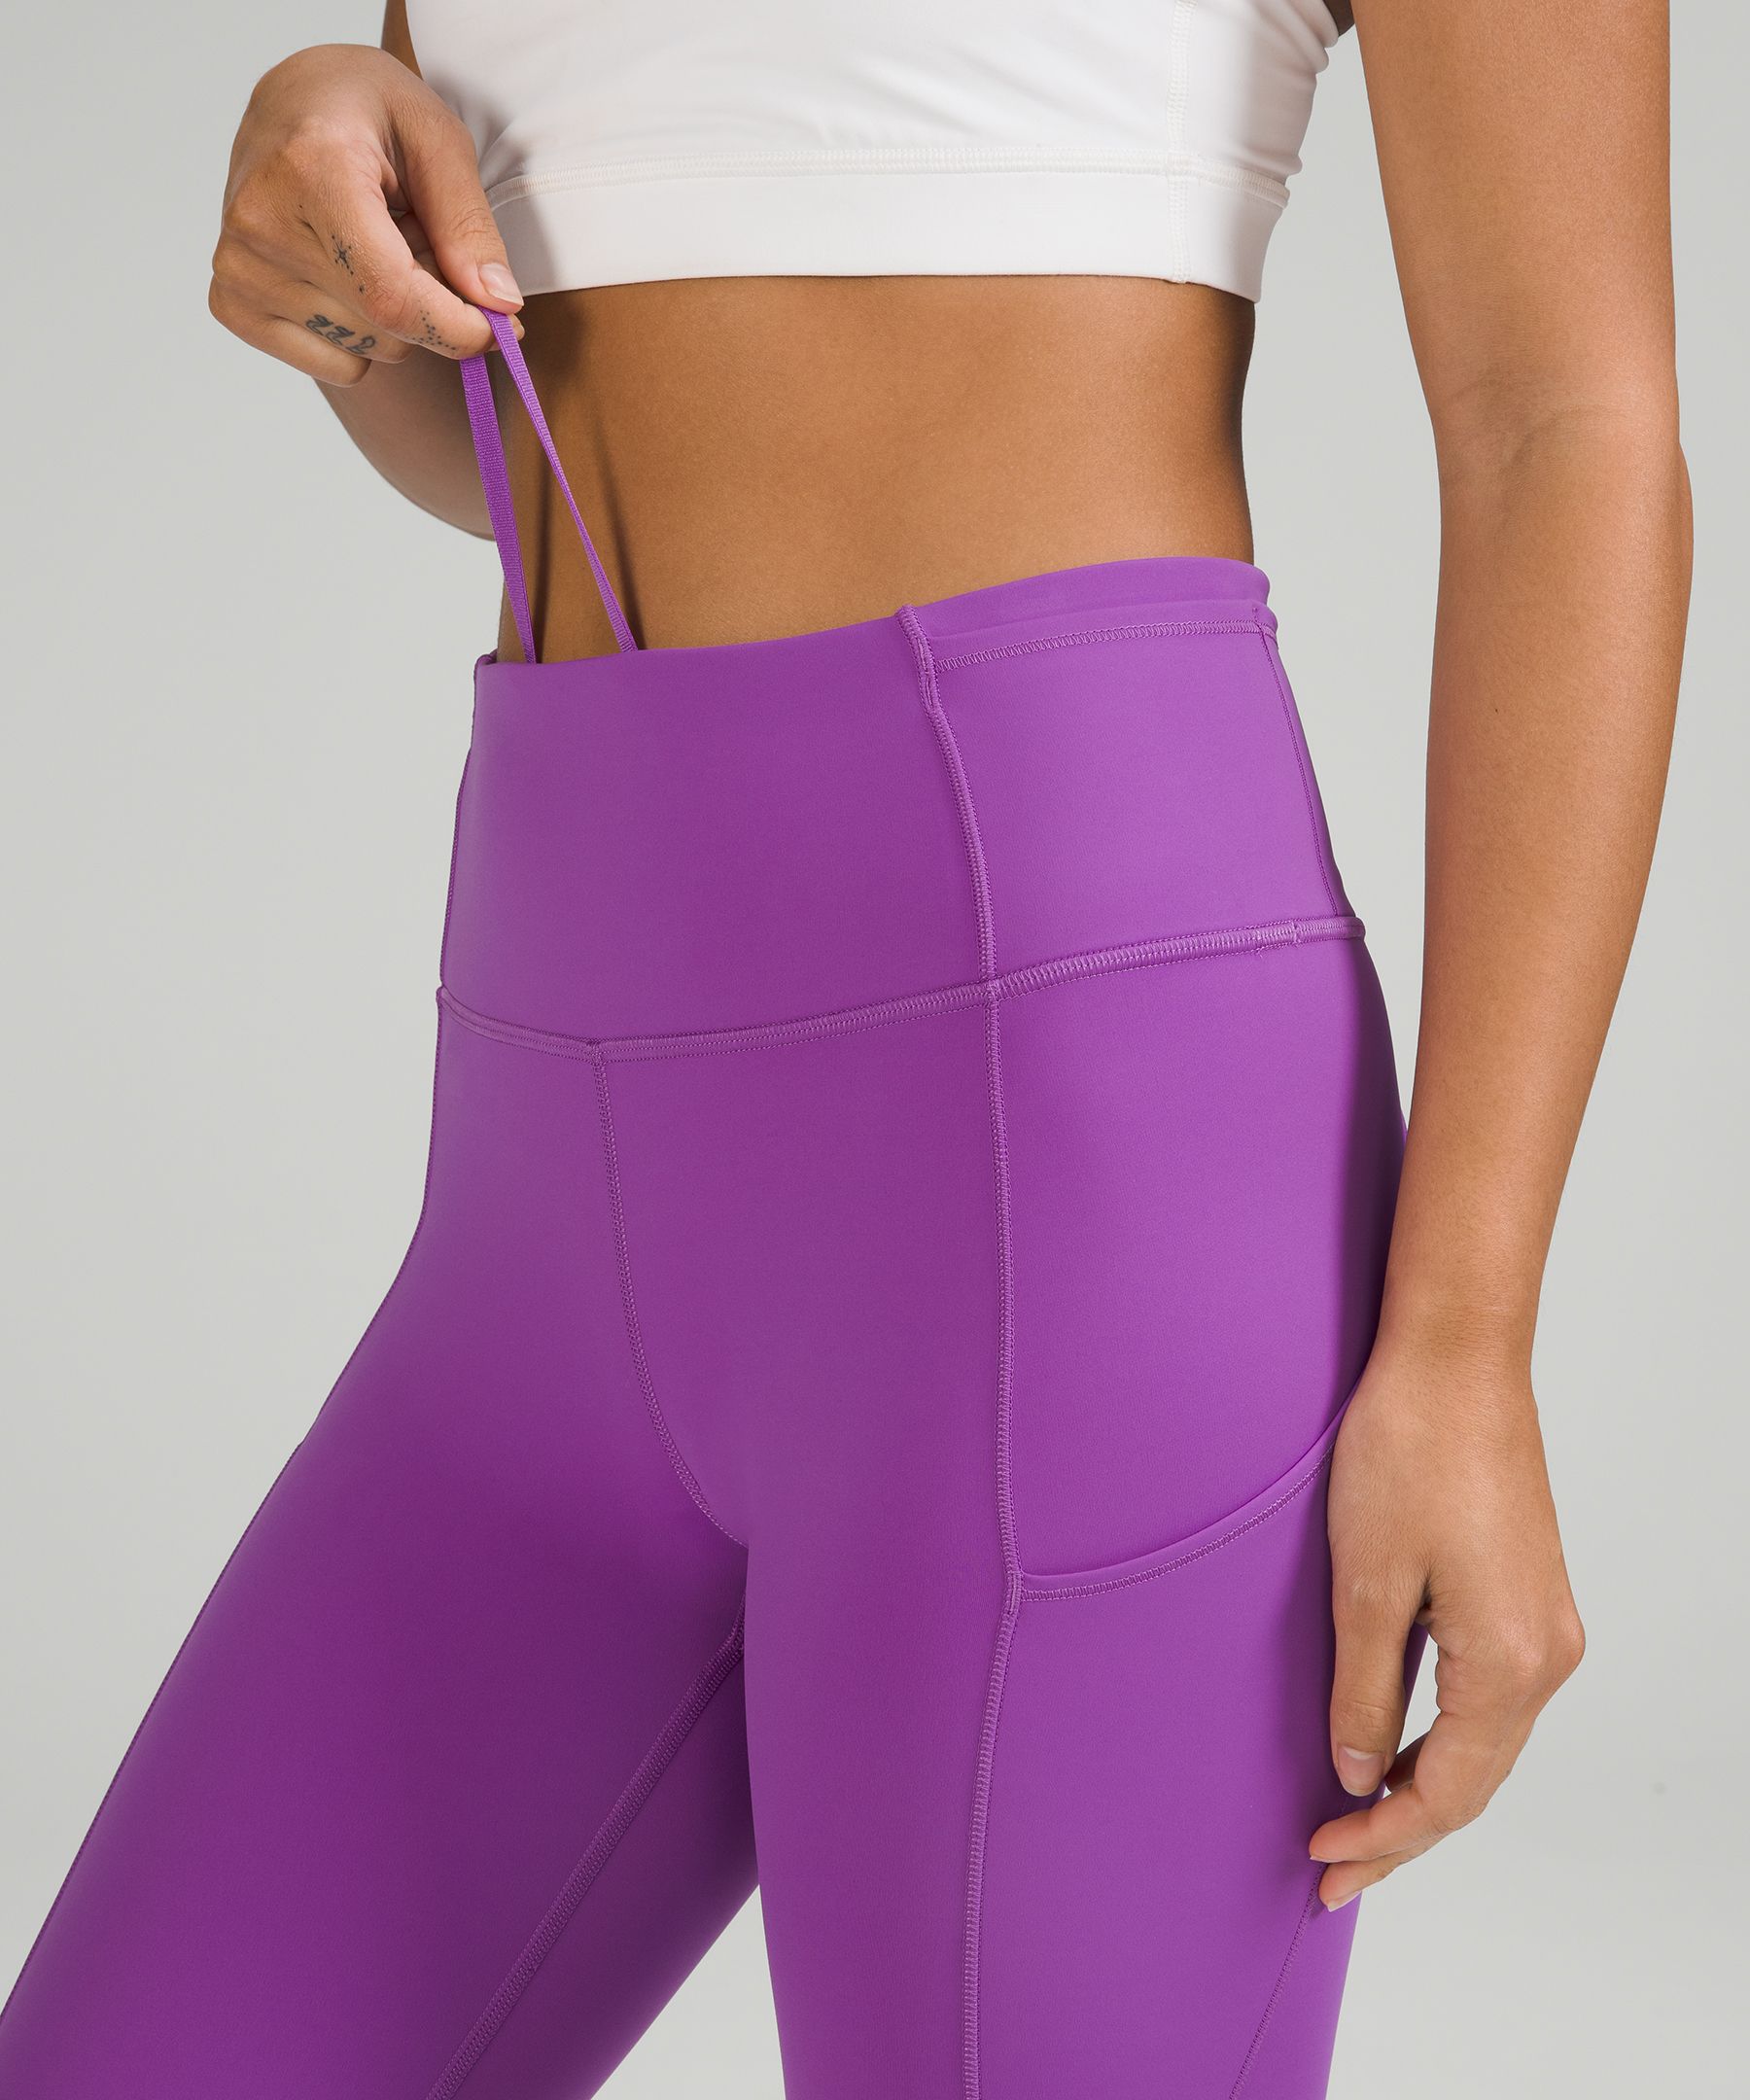 Lululemon Women's Fast and Free High Rise Crop 23/25 Tight Pant